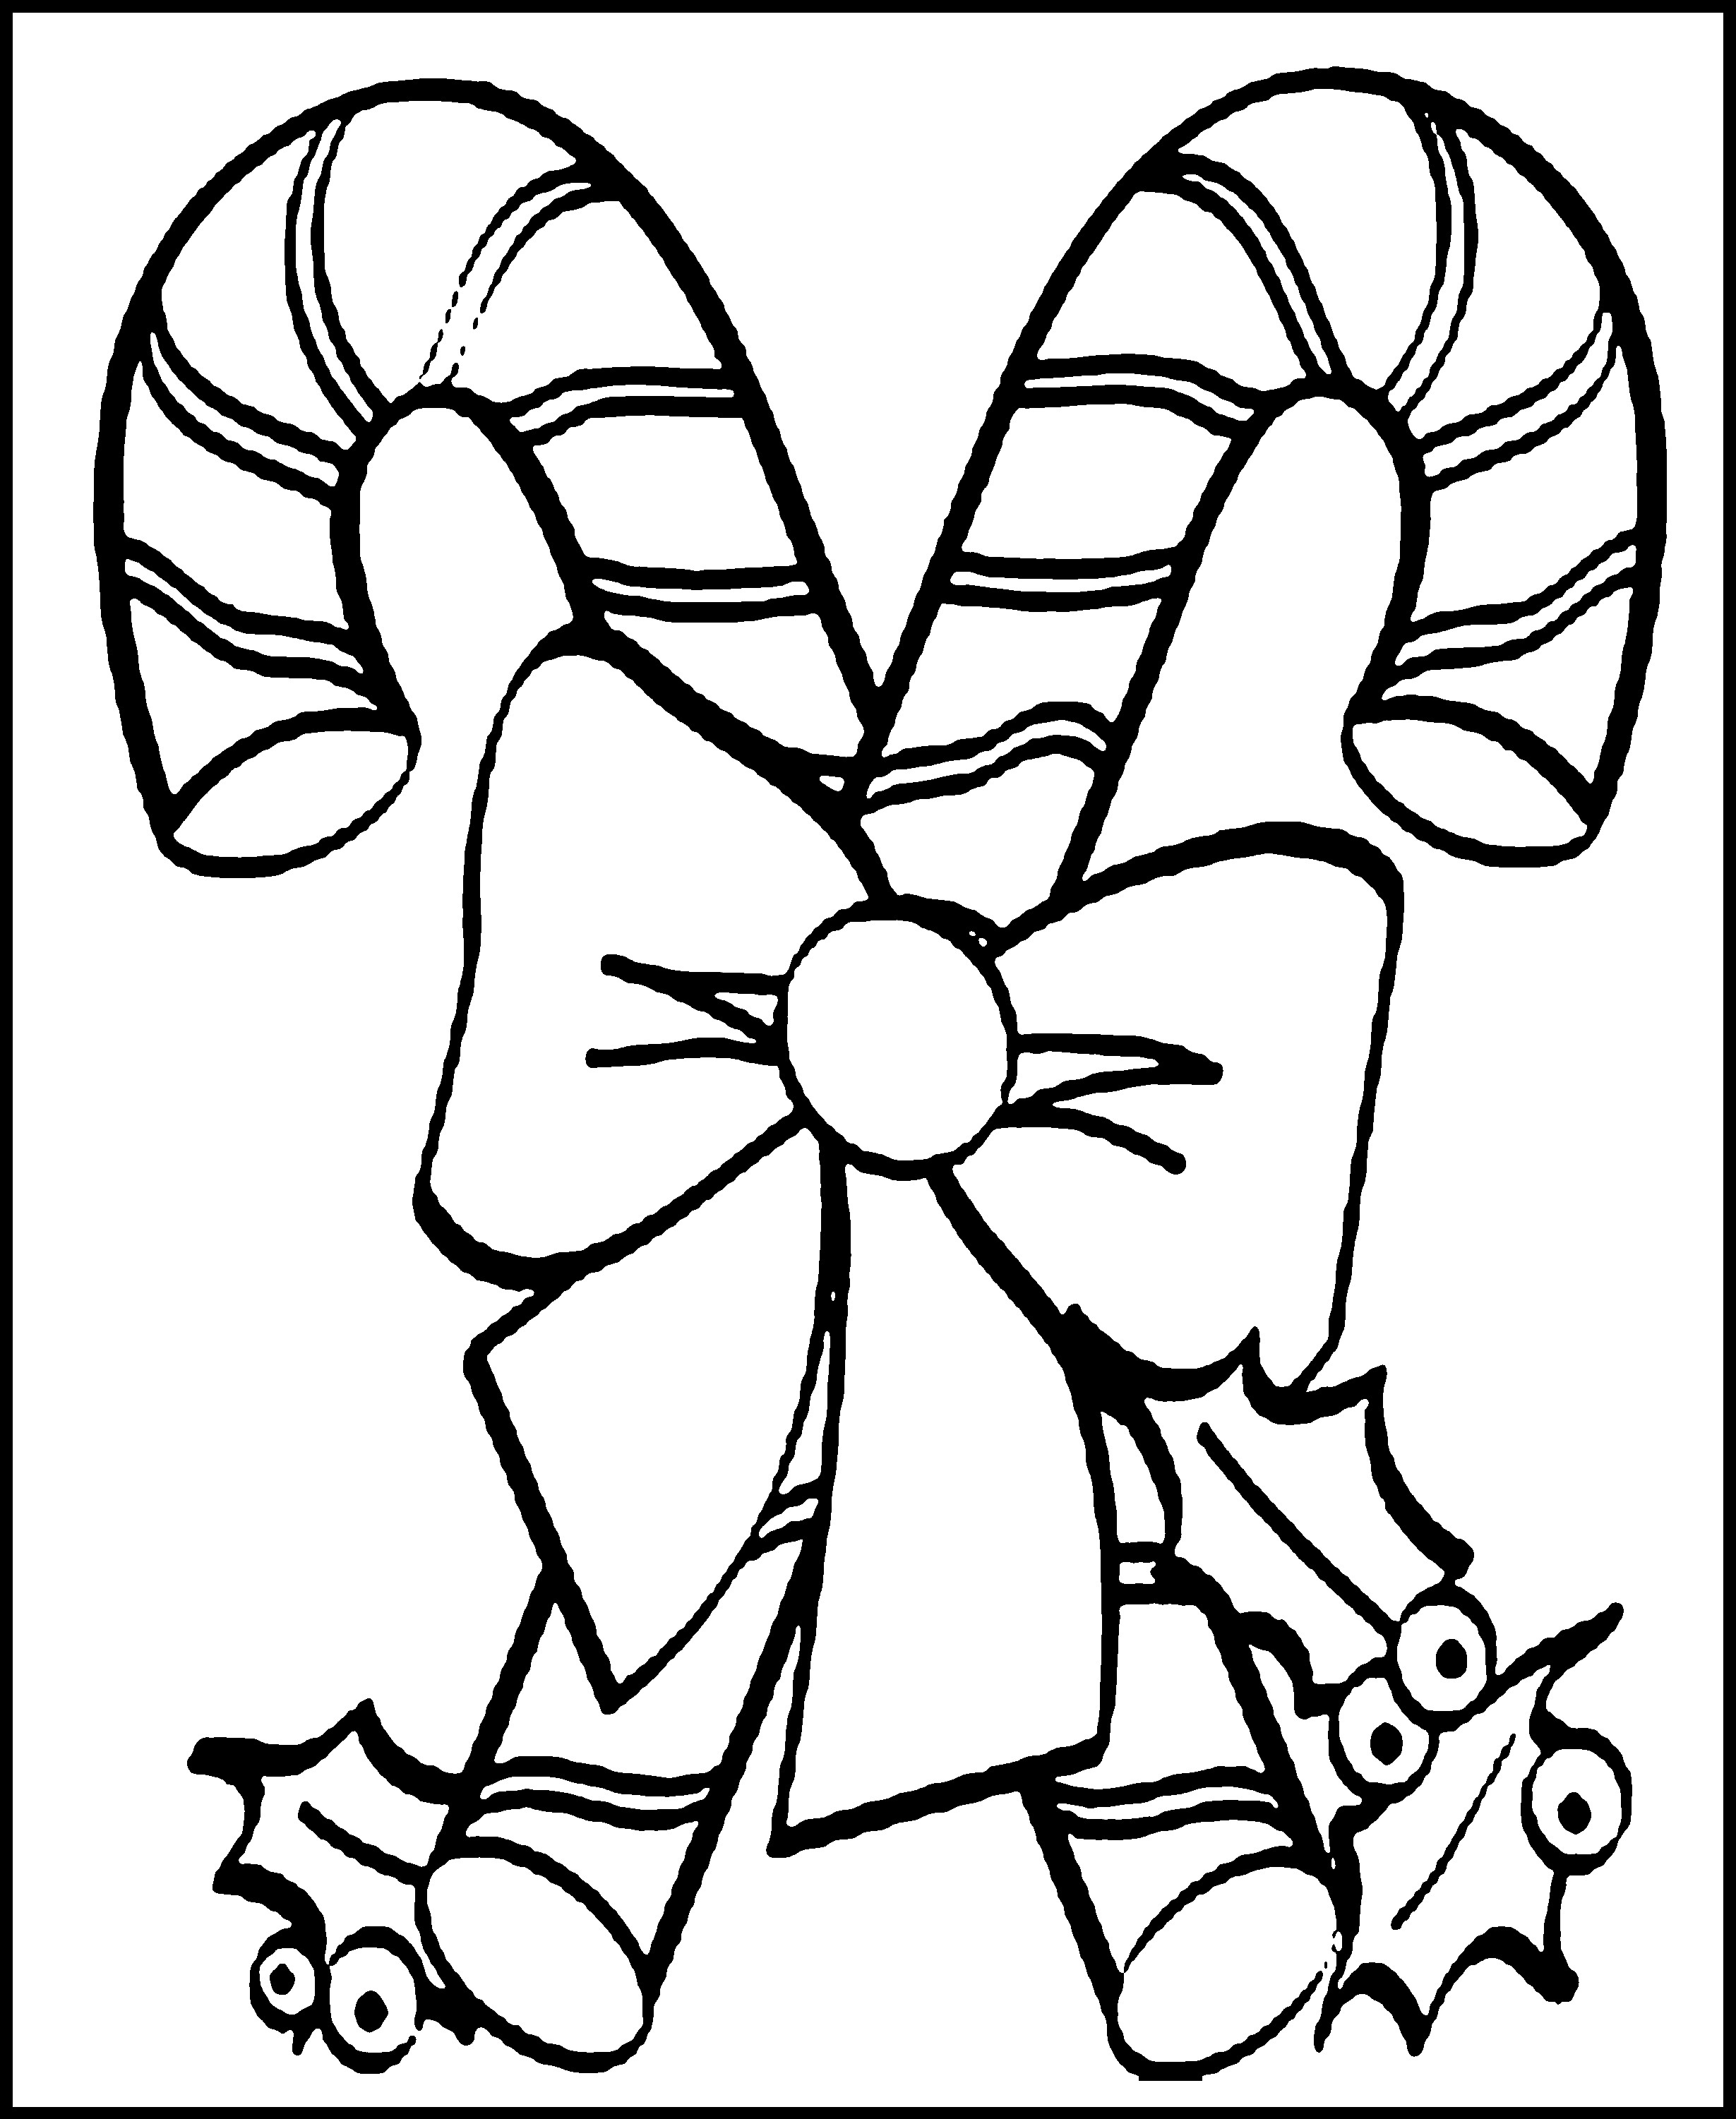 Free Christmas Printable Coloring Pages Coloring Christmas Coloring Pages For Adults Pdf Free Printable